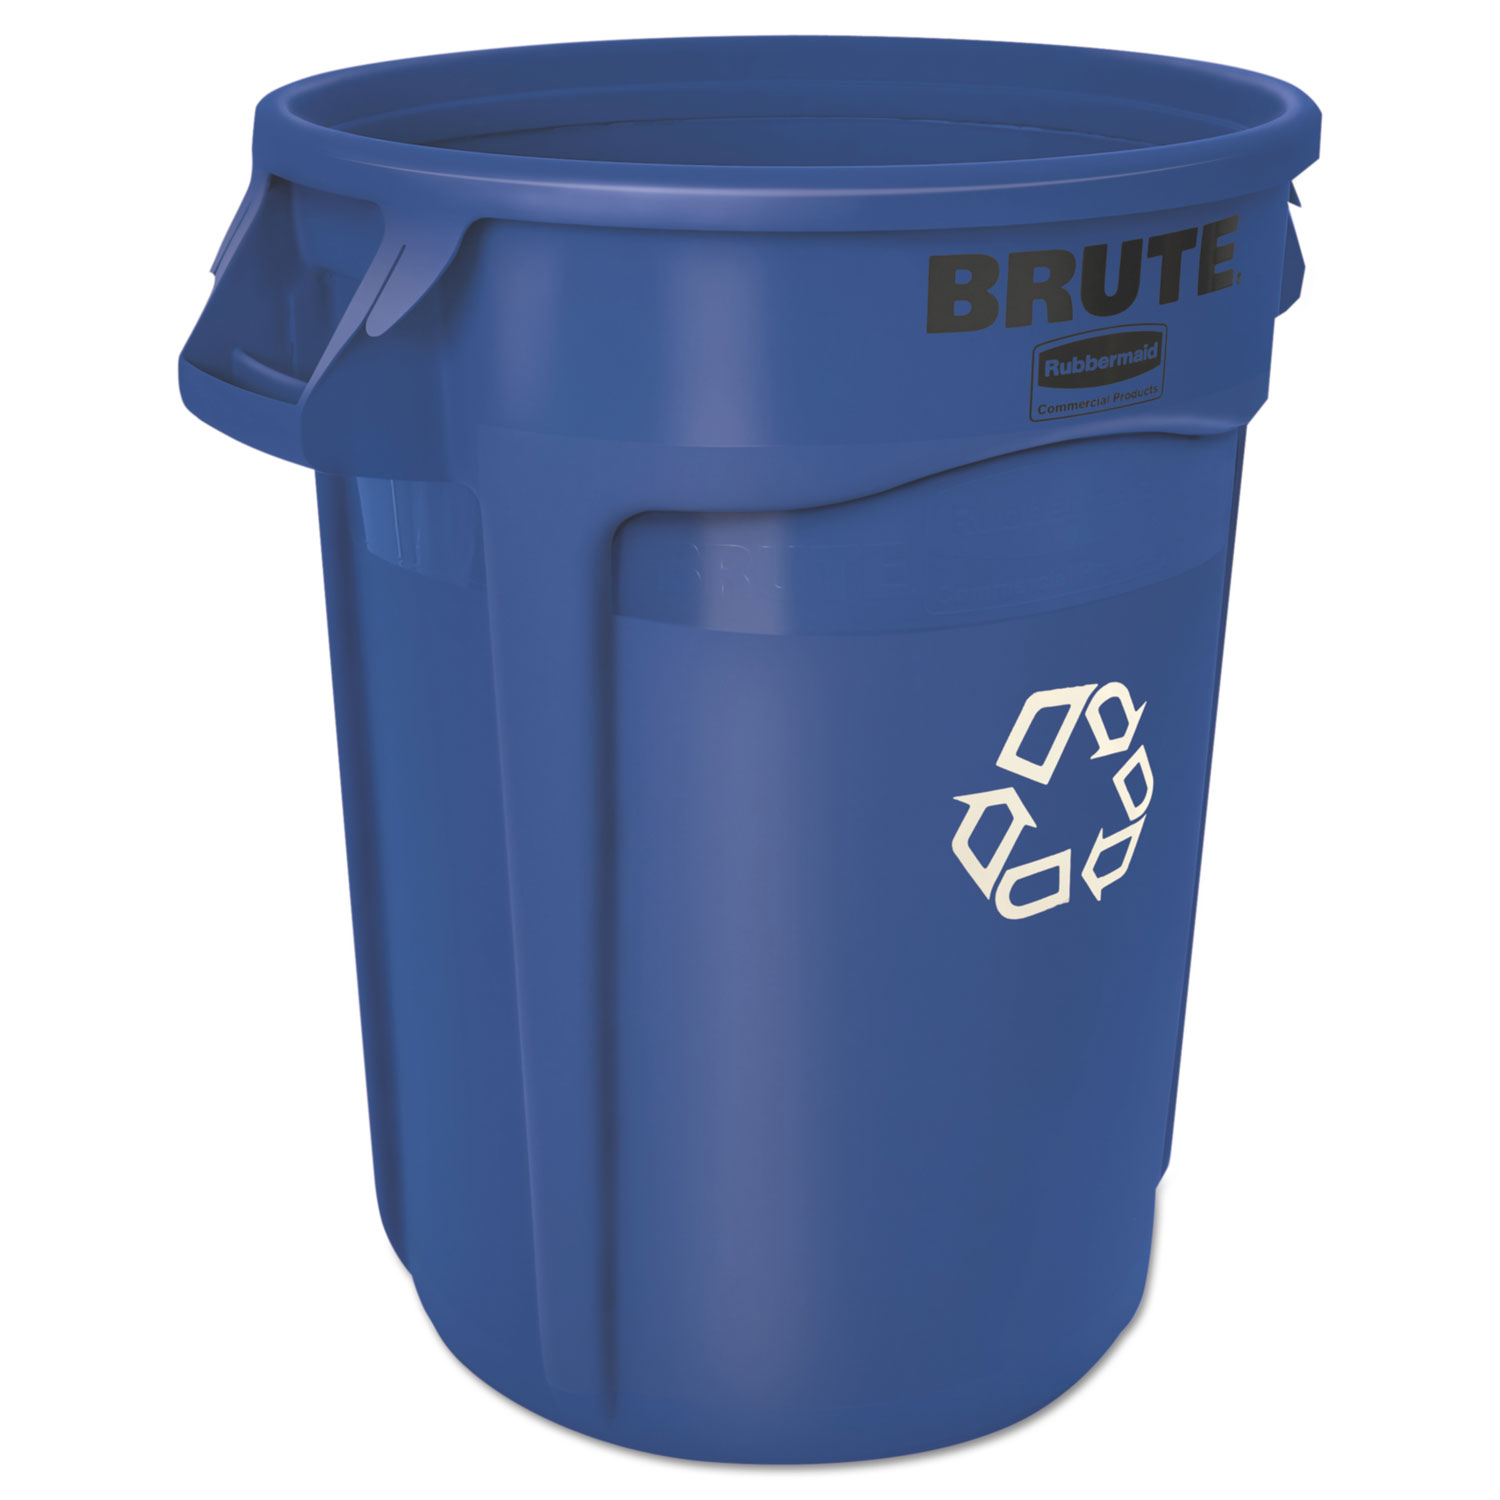  Rubbermaid Commercial FG263273BLUE Brute Recycling Container, Round, 32 gal, Blue (RCP263273BE) 